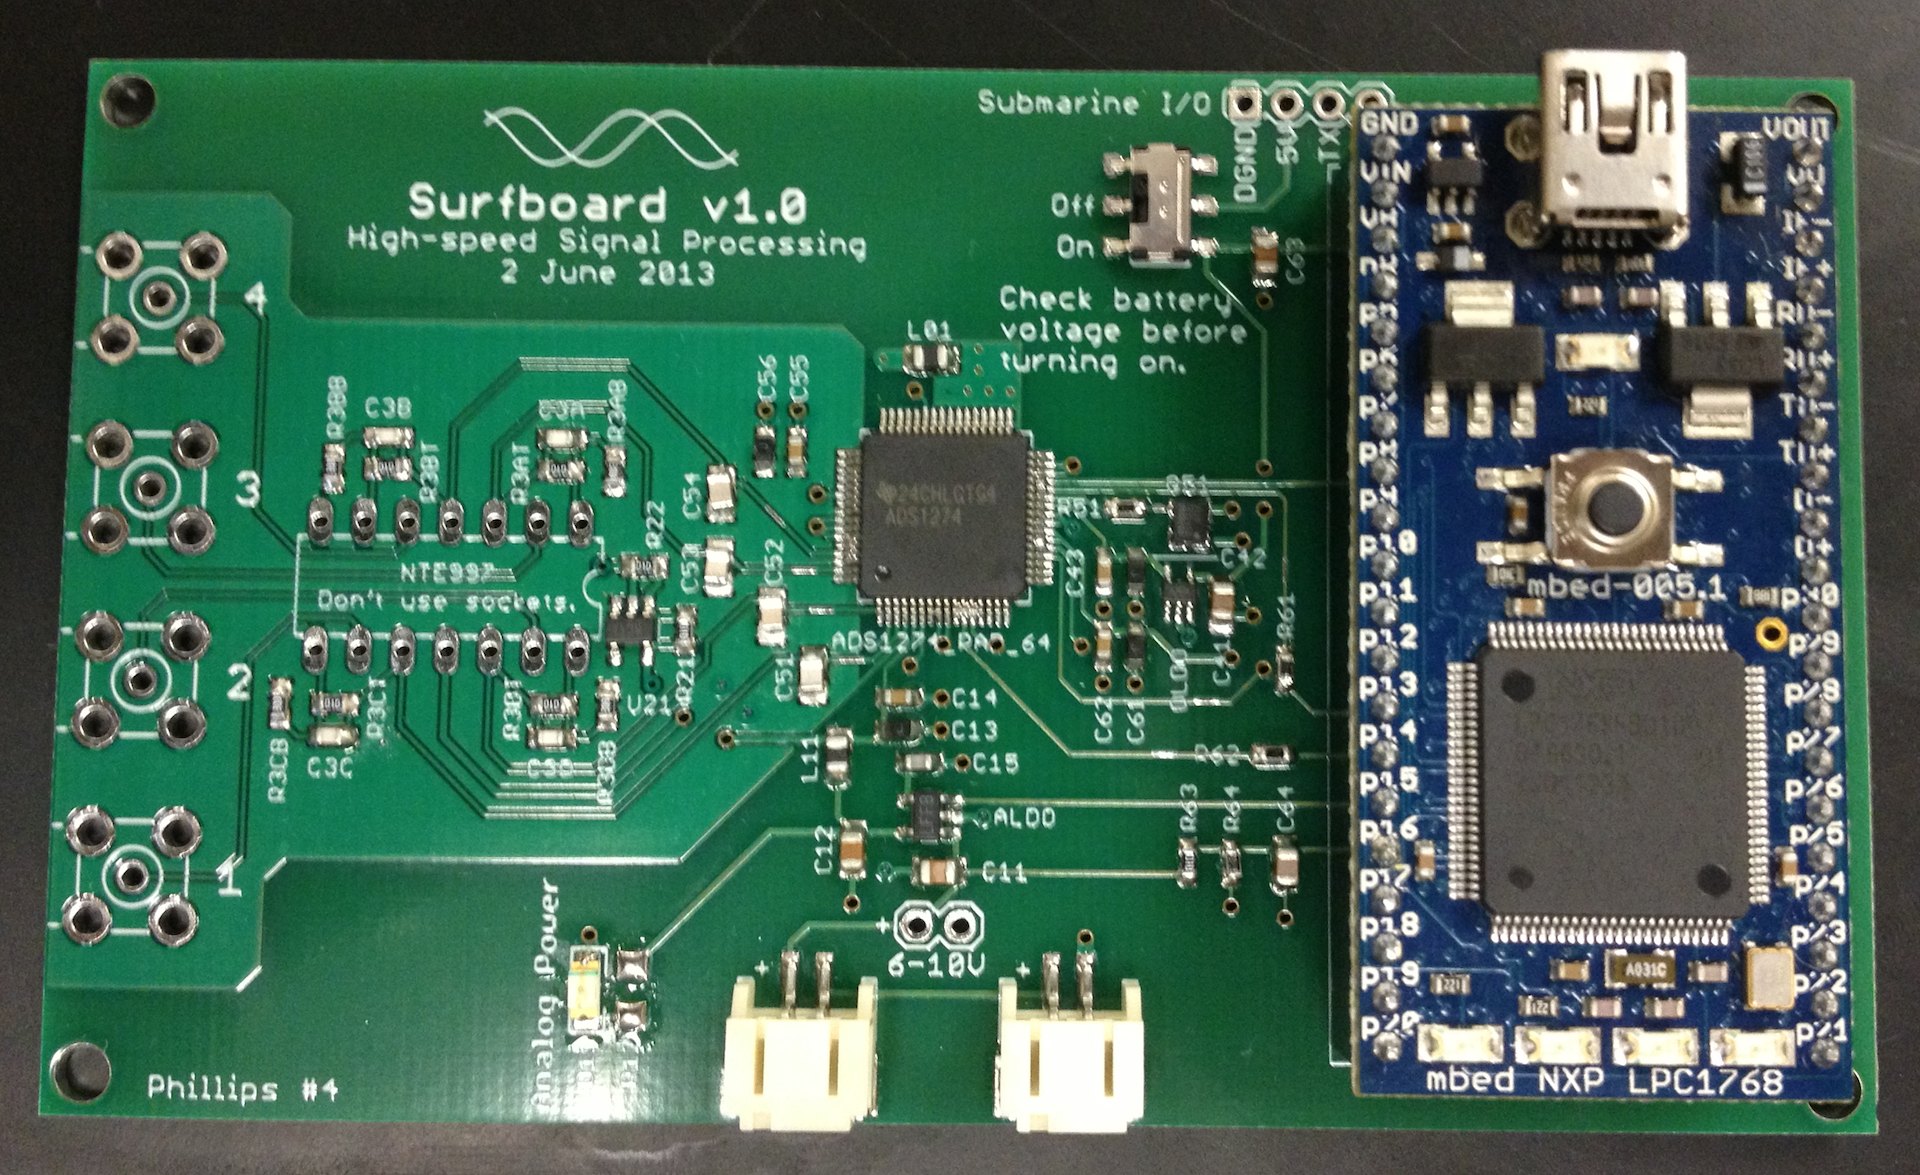 A green circuit board labeled Surfboard.